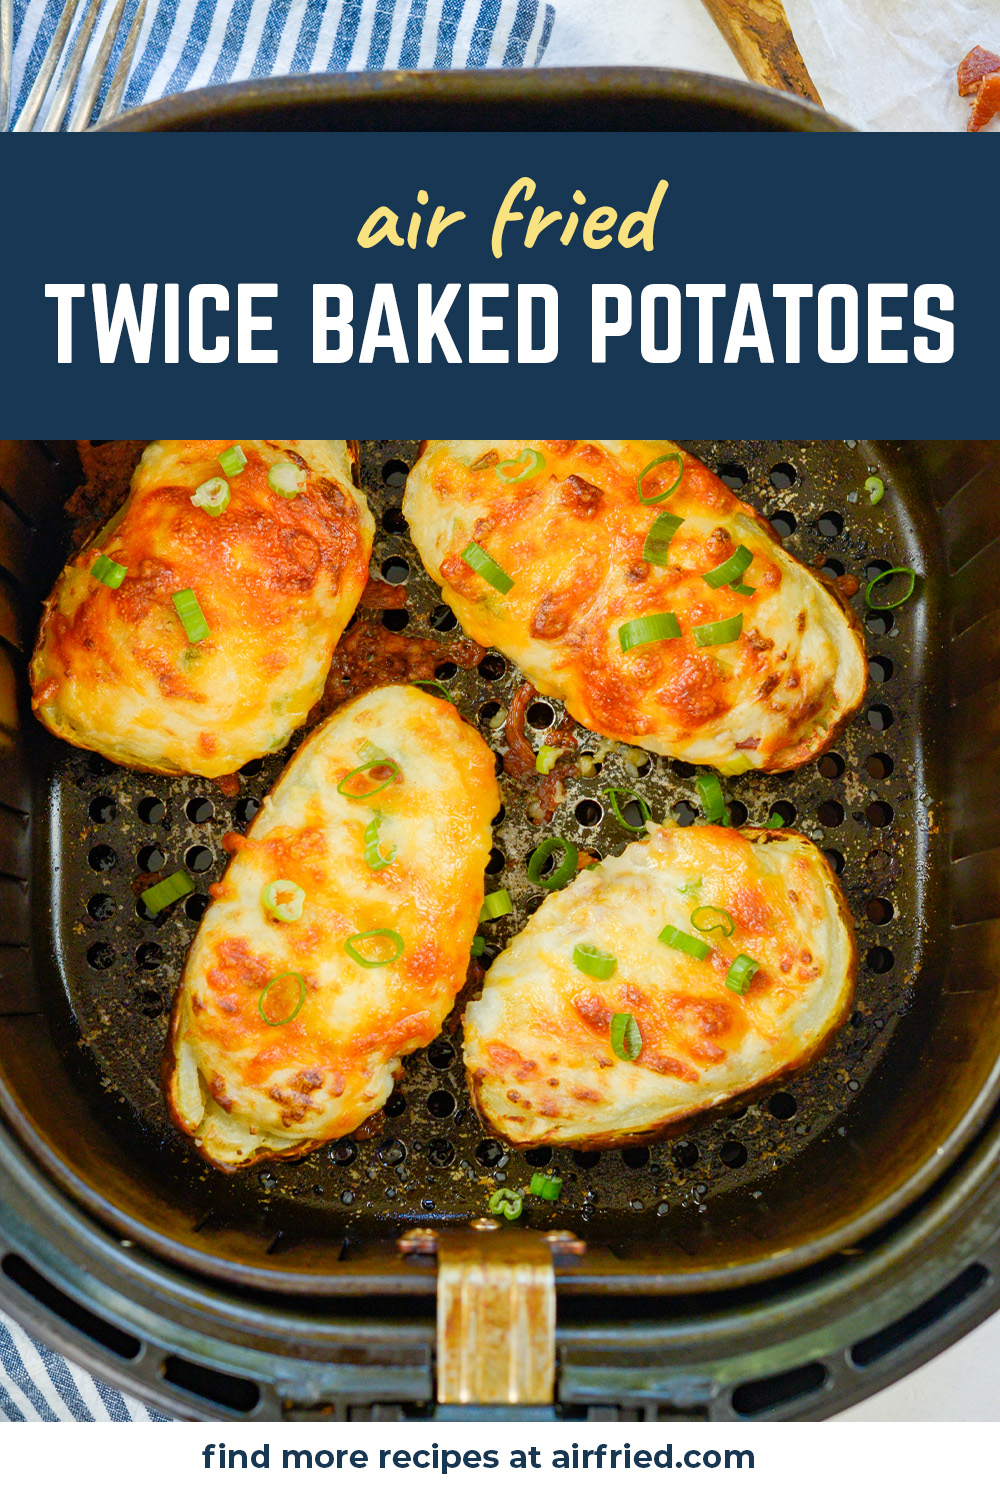 These flavorful twice baked potatoes have a wonderful texture in the air fryer!